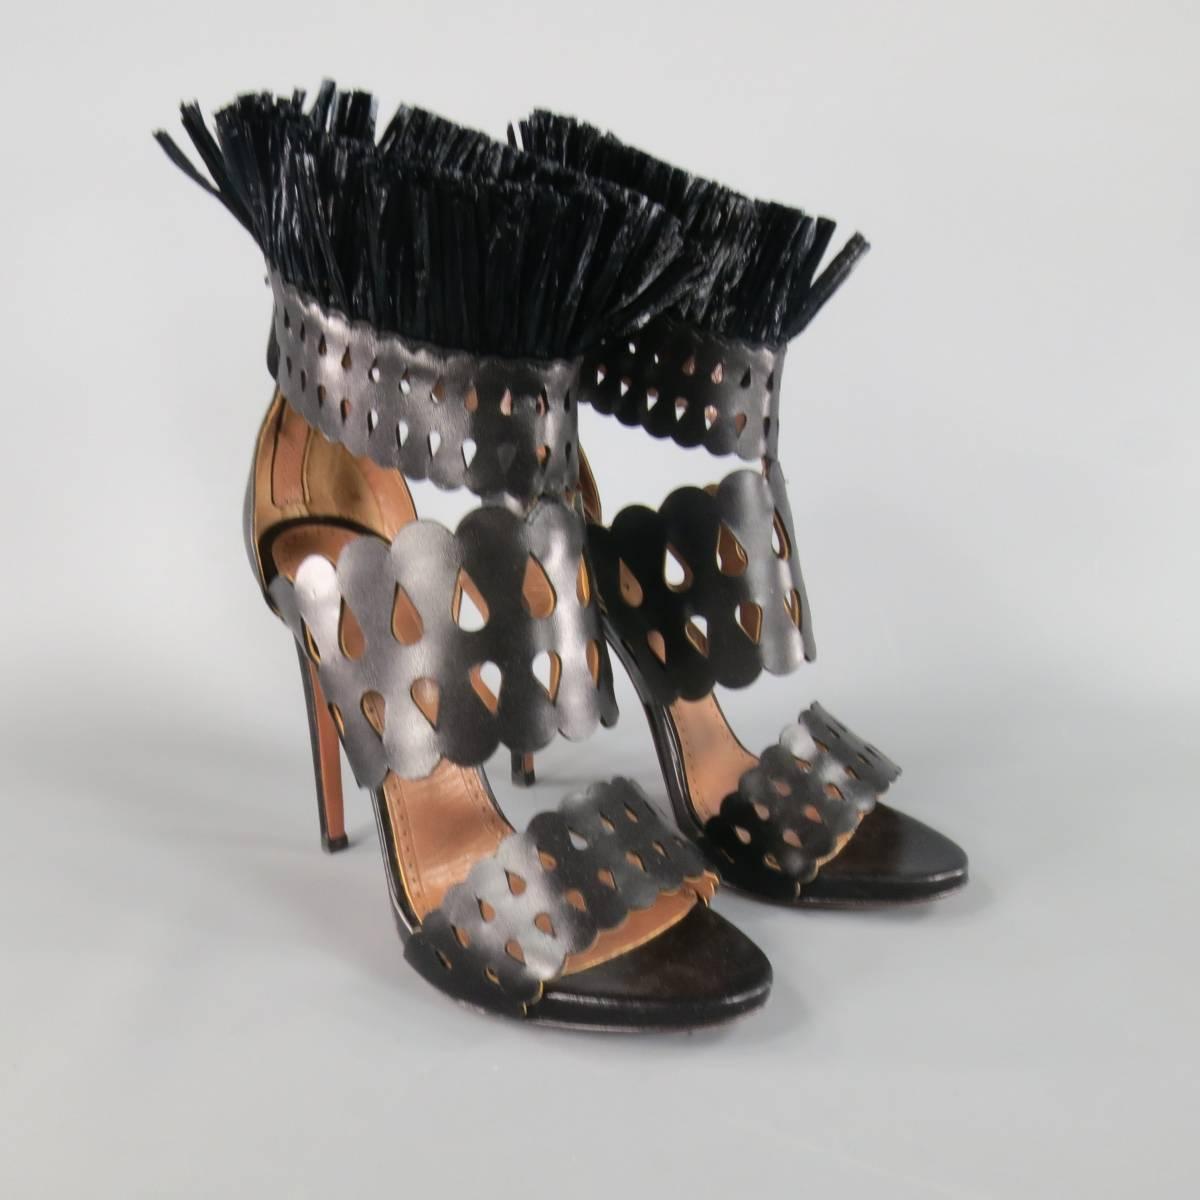 Fabulous ALAIA high heeled sandals in smooth black leather featuring thick, rounded cutout straps, low platform, and stand up fringe ankle accent. Made in Italy.
 
Excellent Pre-Owned Condition.
Marked: IT 38.5
 
Heel: 4.75 in.
